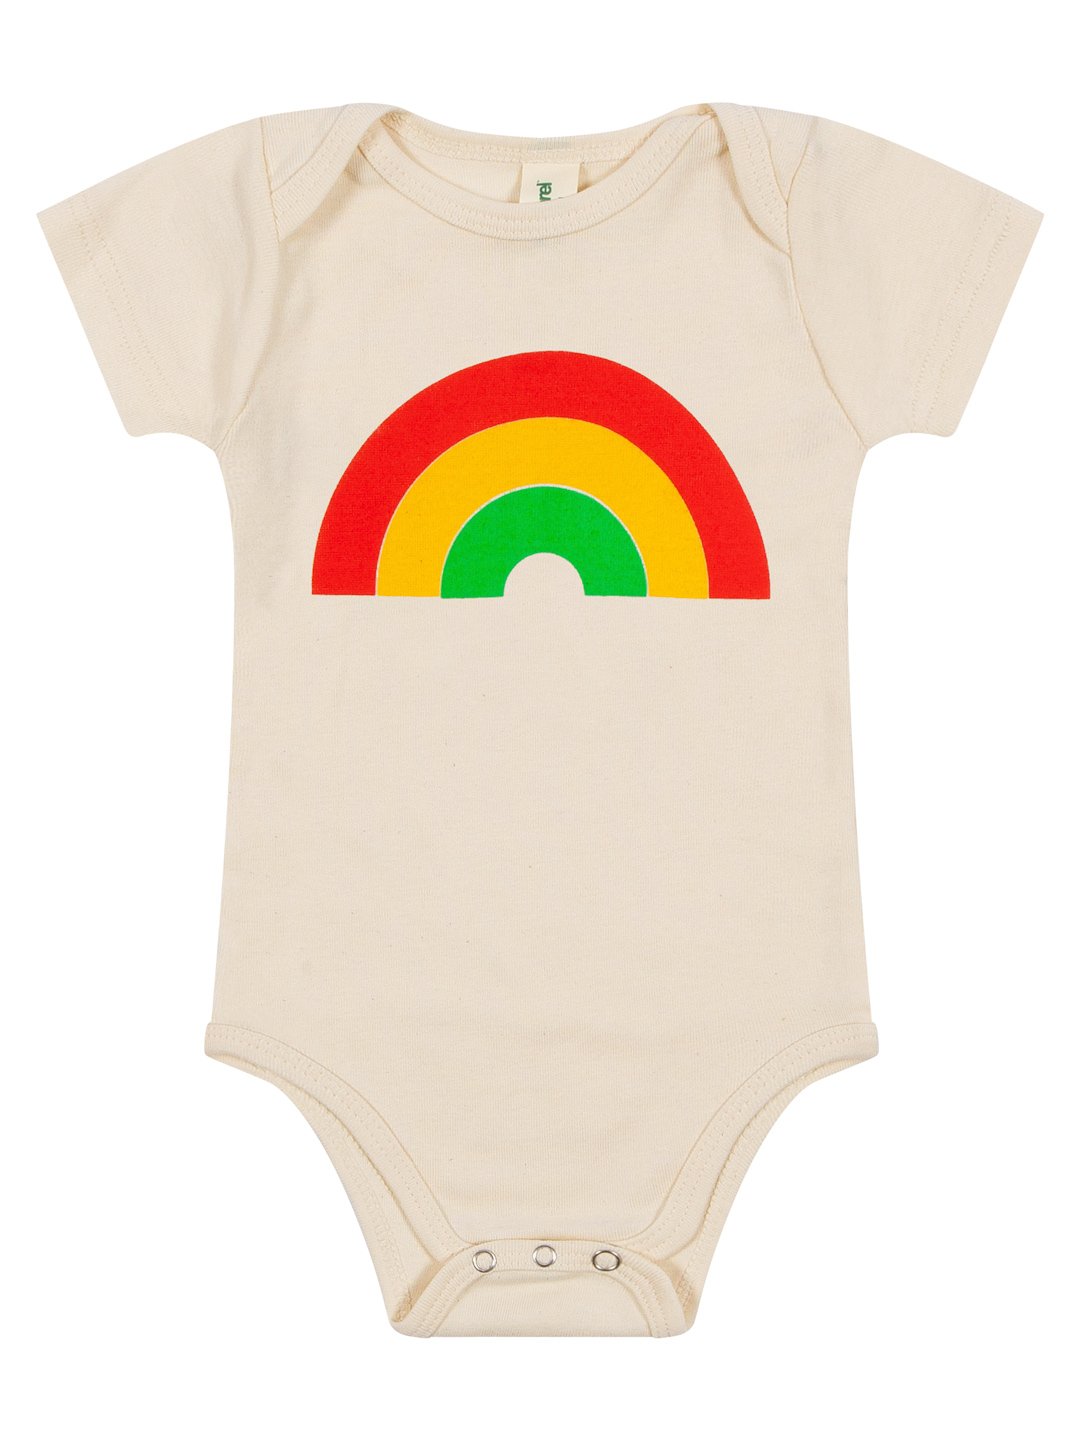 Rainbow Baby Onesie Natural - The Lake and Company